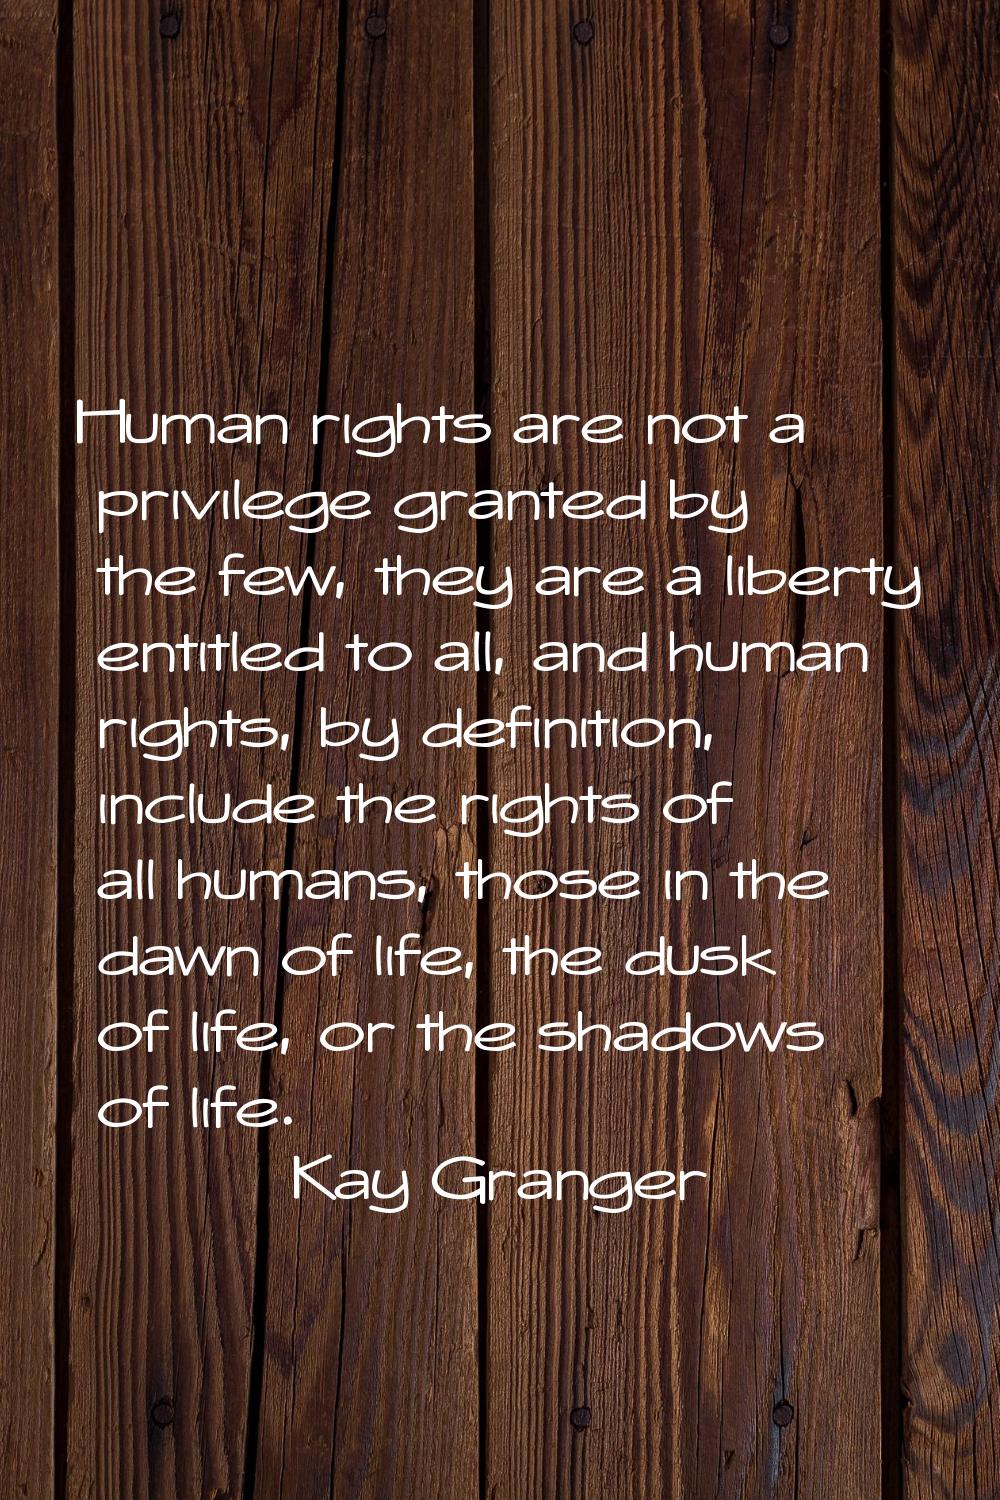 Human rights are not a privilege granted by the few, they are a liberty entitled to all, and human 